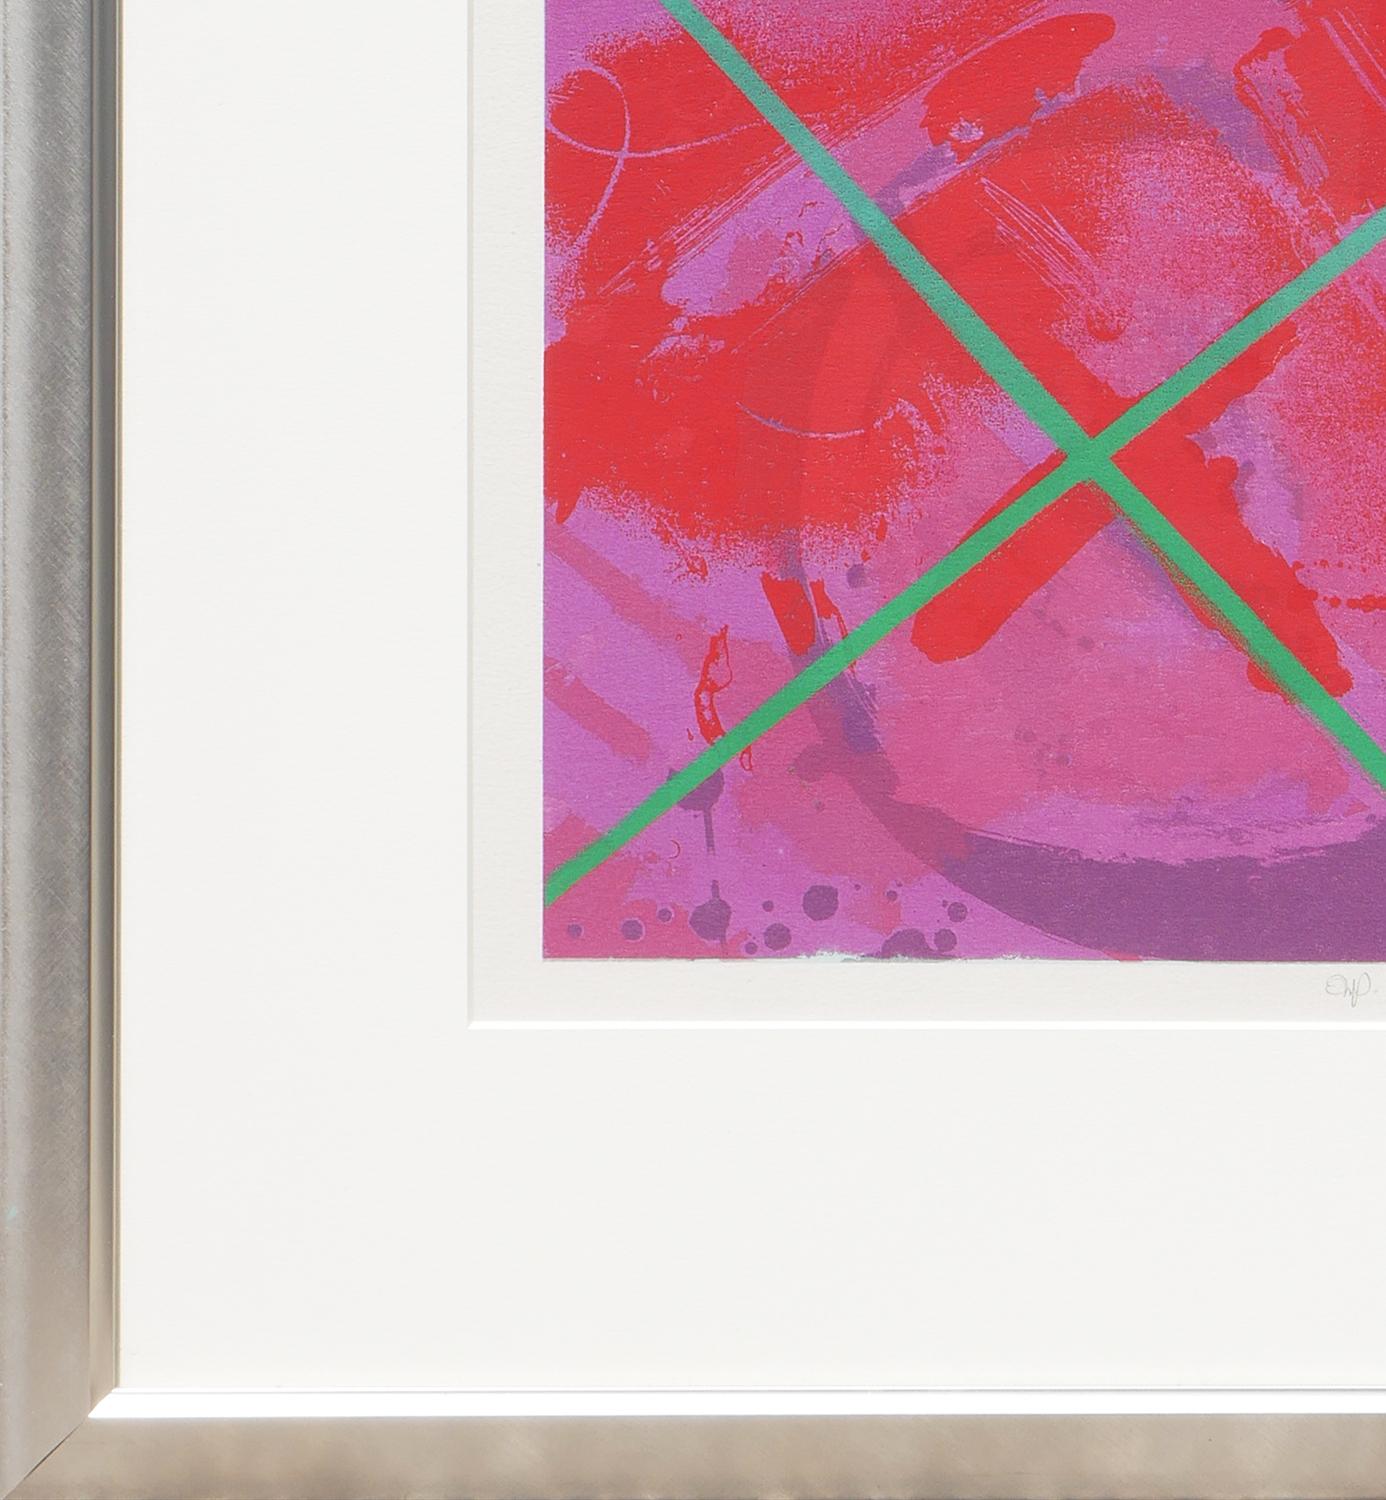 Colorful modern abstract lithograph by modern Texas artist Allan Otho Smith. The work features a series of geometric shapes in red, pink, and green tones. The use of complementary colors makes the piece pop. Signed and dated in pencil by the artist